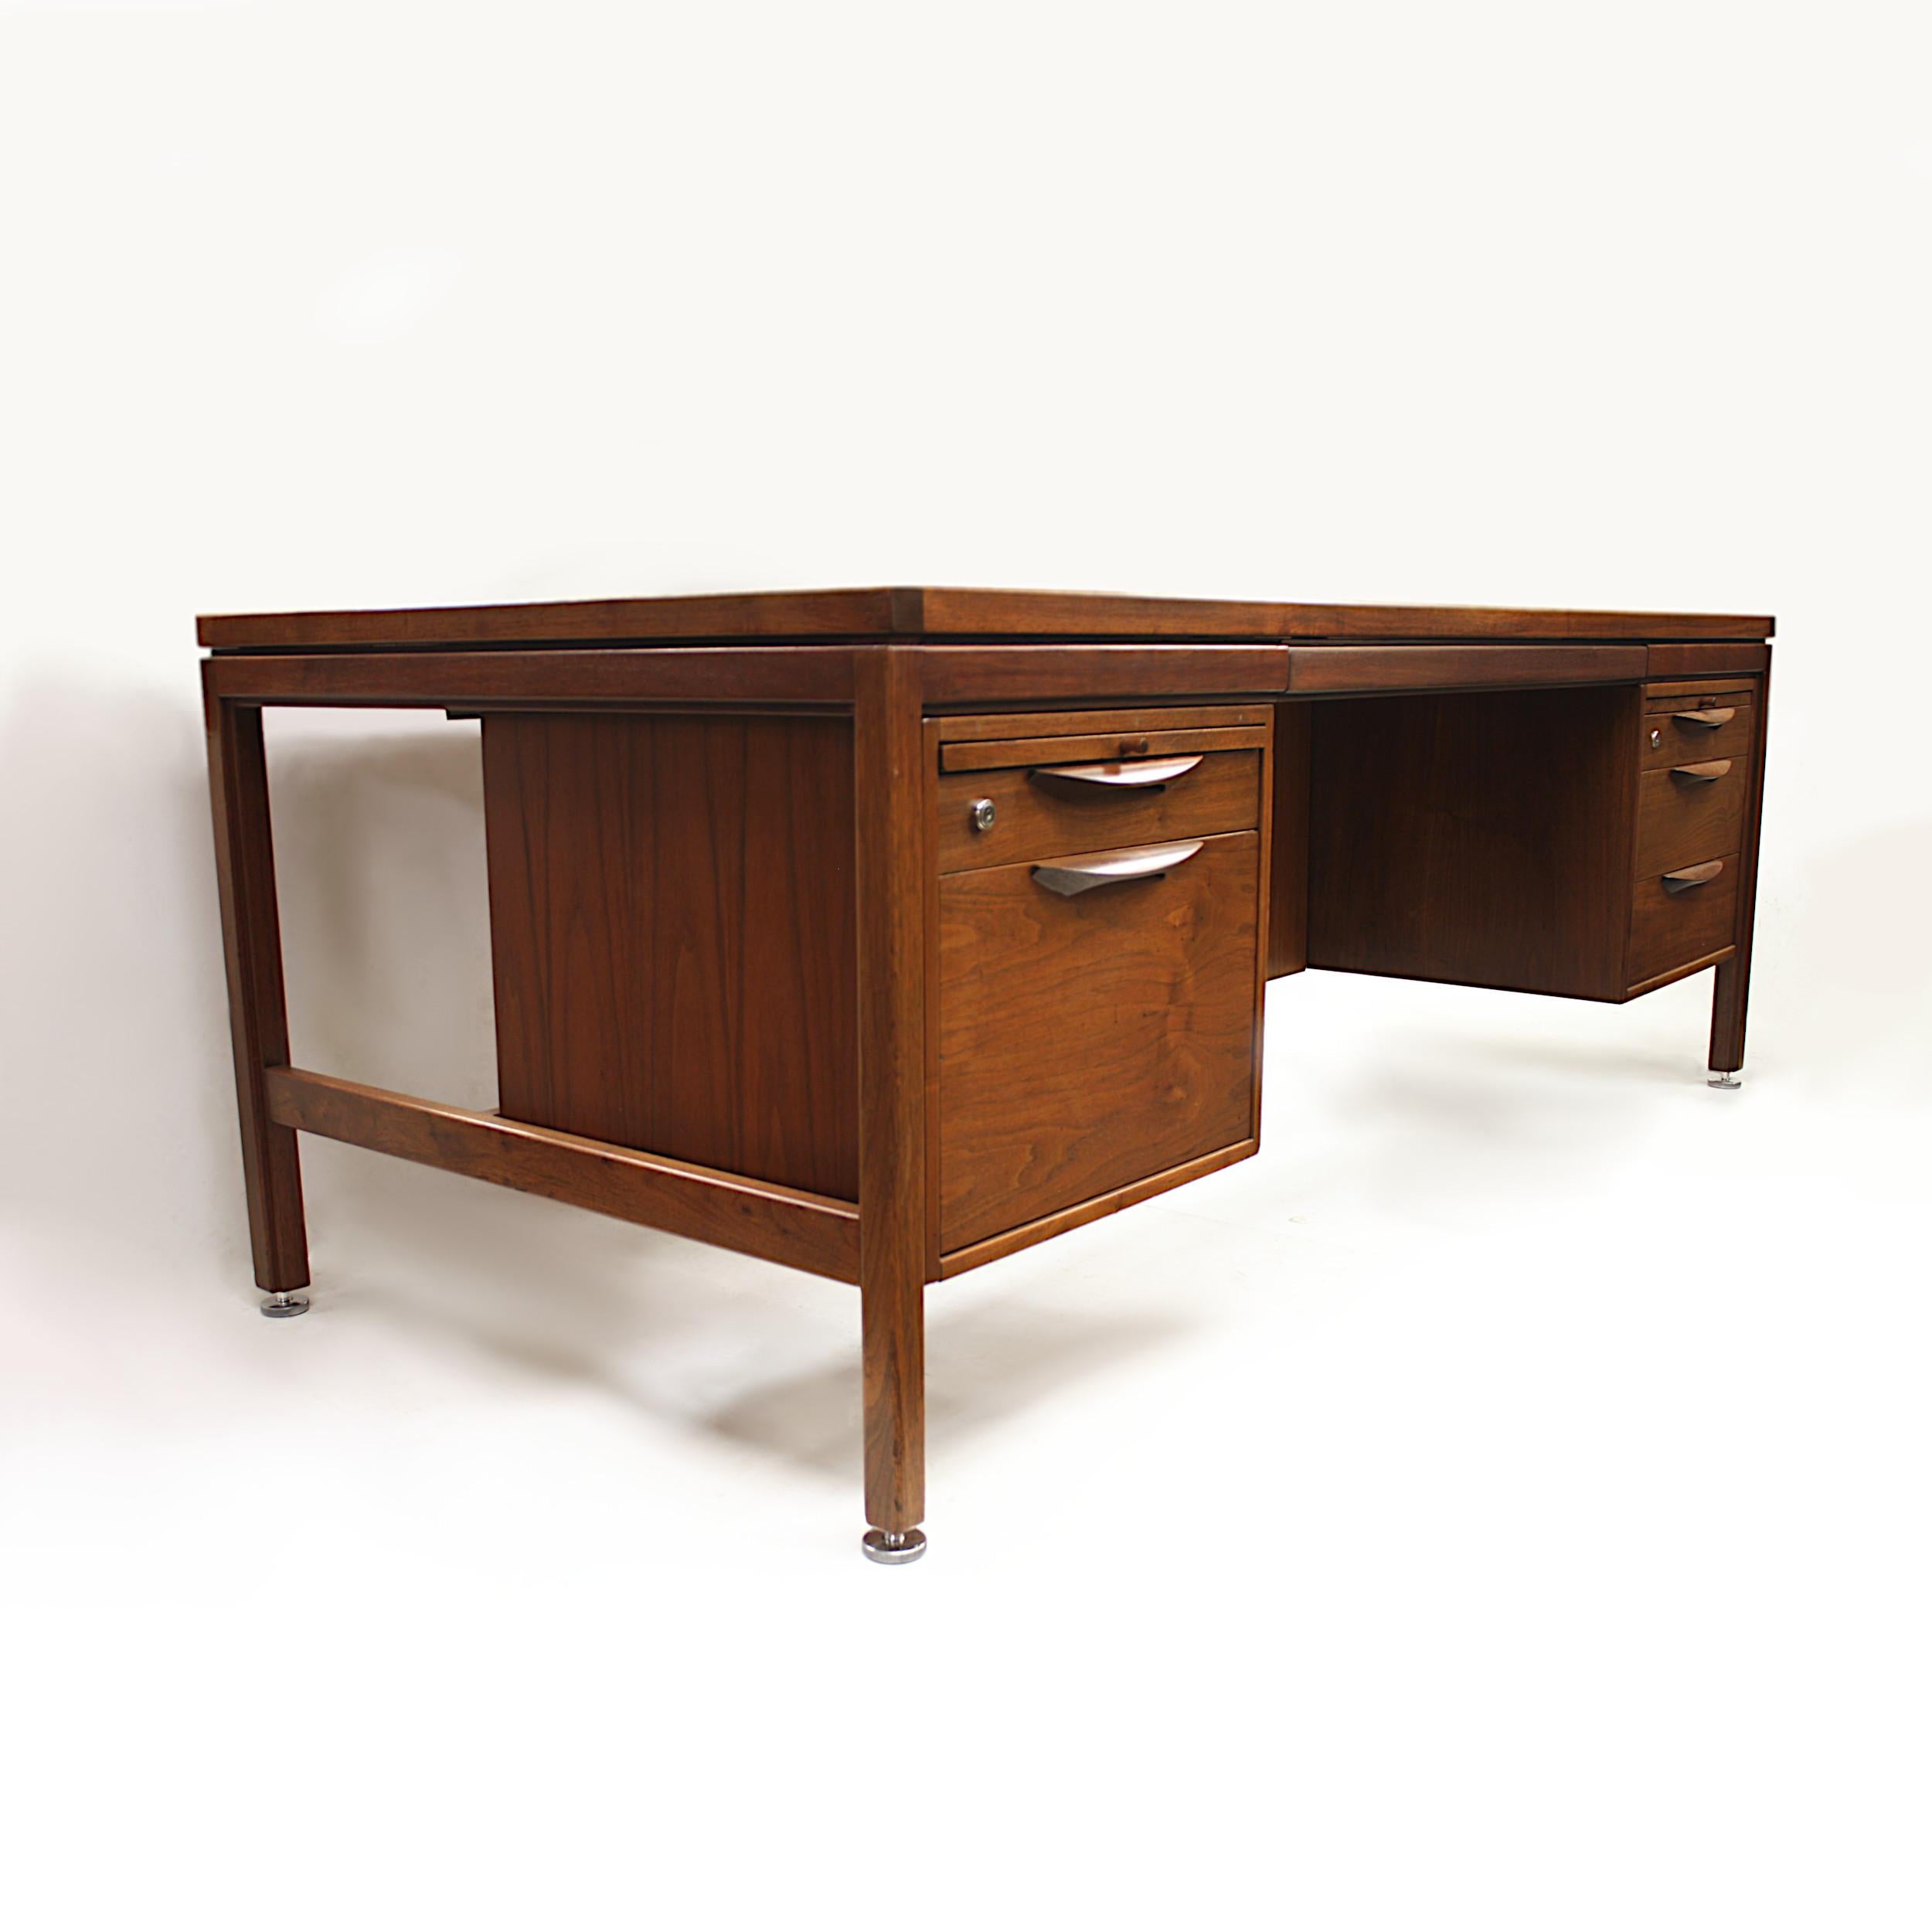 This wonderful executive desk was designed and manufactured by Jens Risom design and produced during the mid-late 1970s. The desk includes many interesting details including, Dual cabinets, solid aluminum height-adjustable feet, gorgeous parabolic